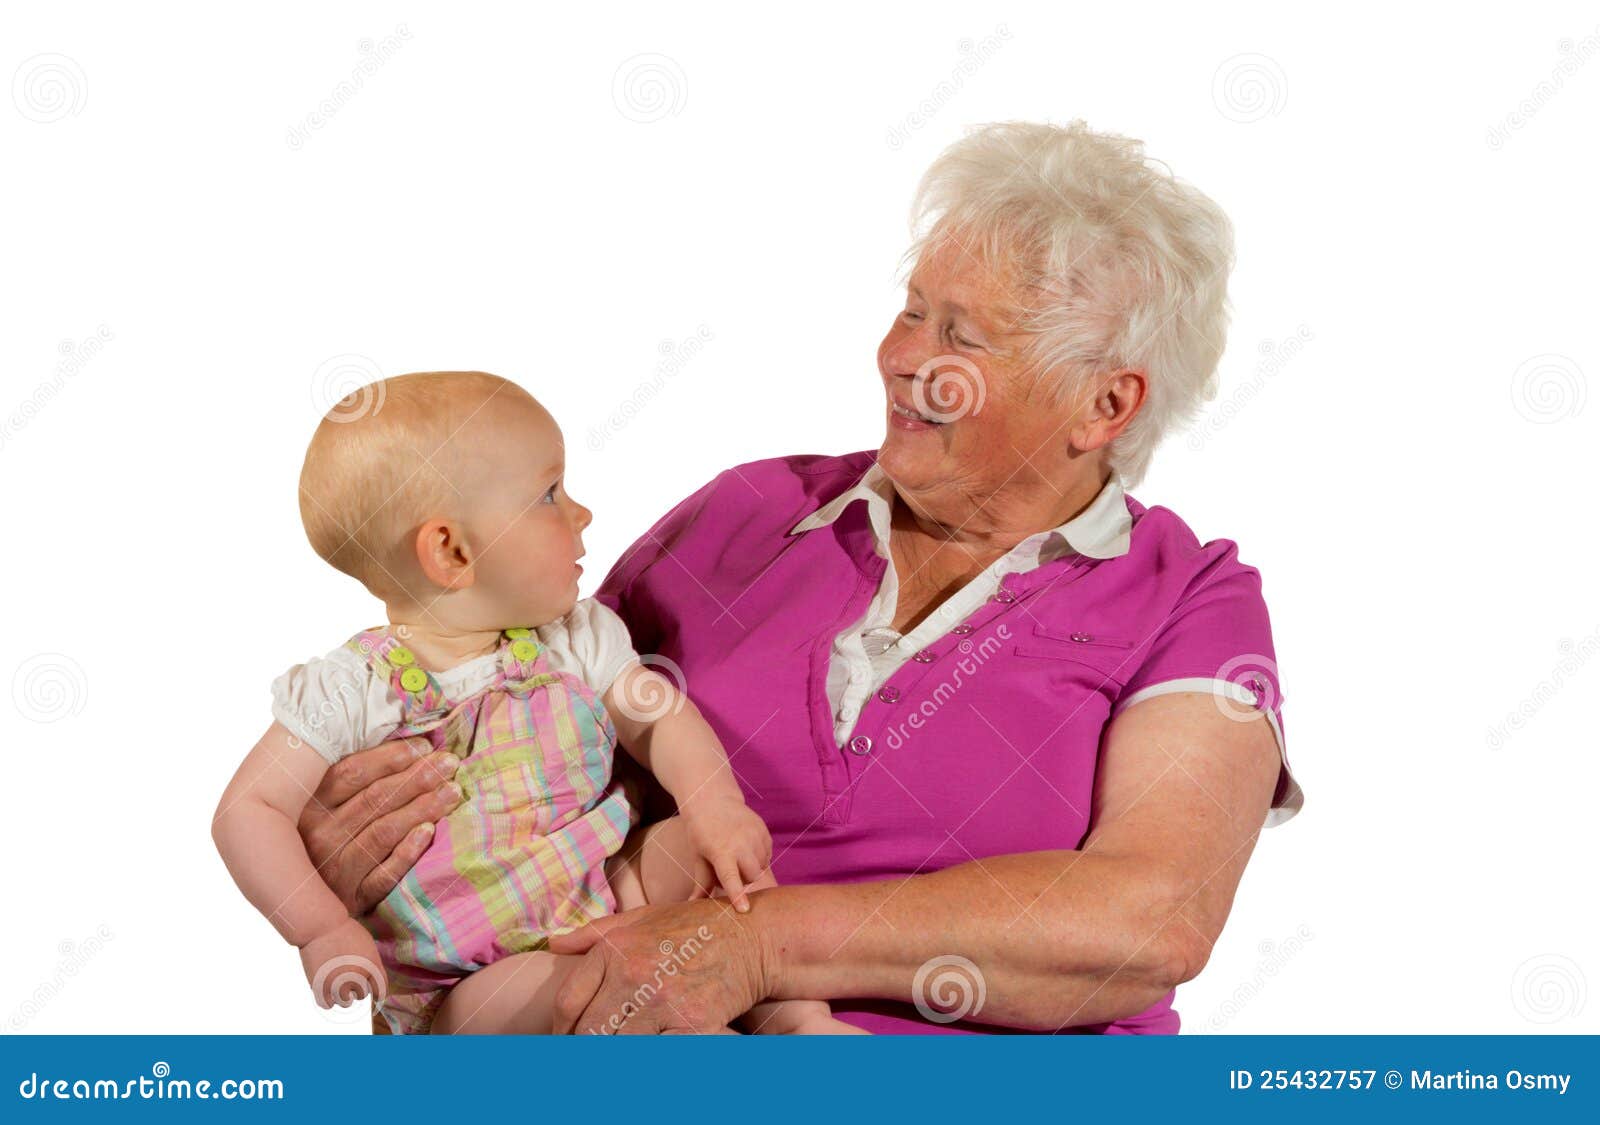 trusting young baby with grandma